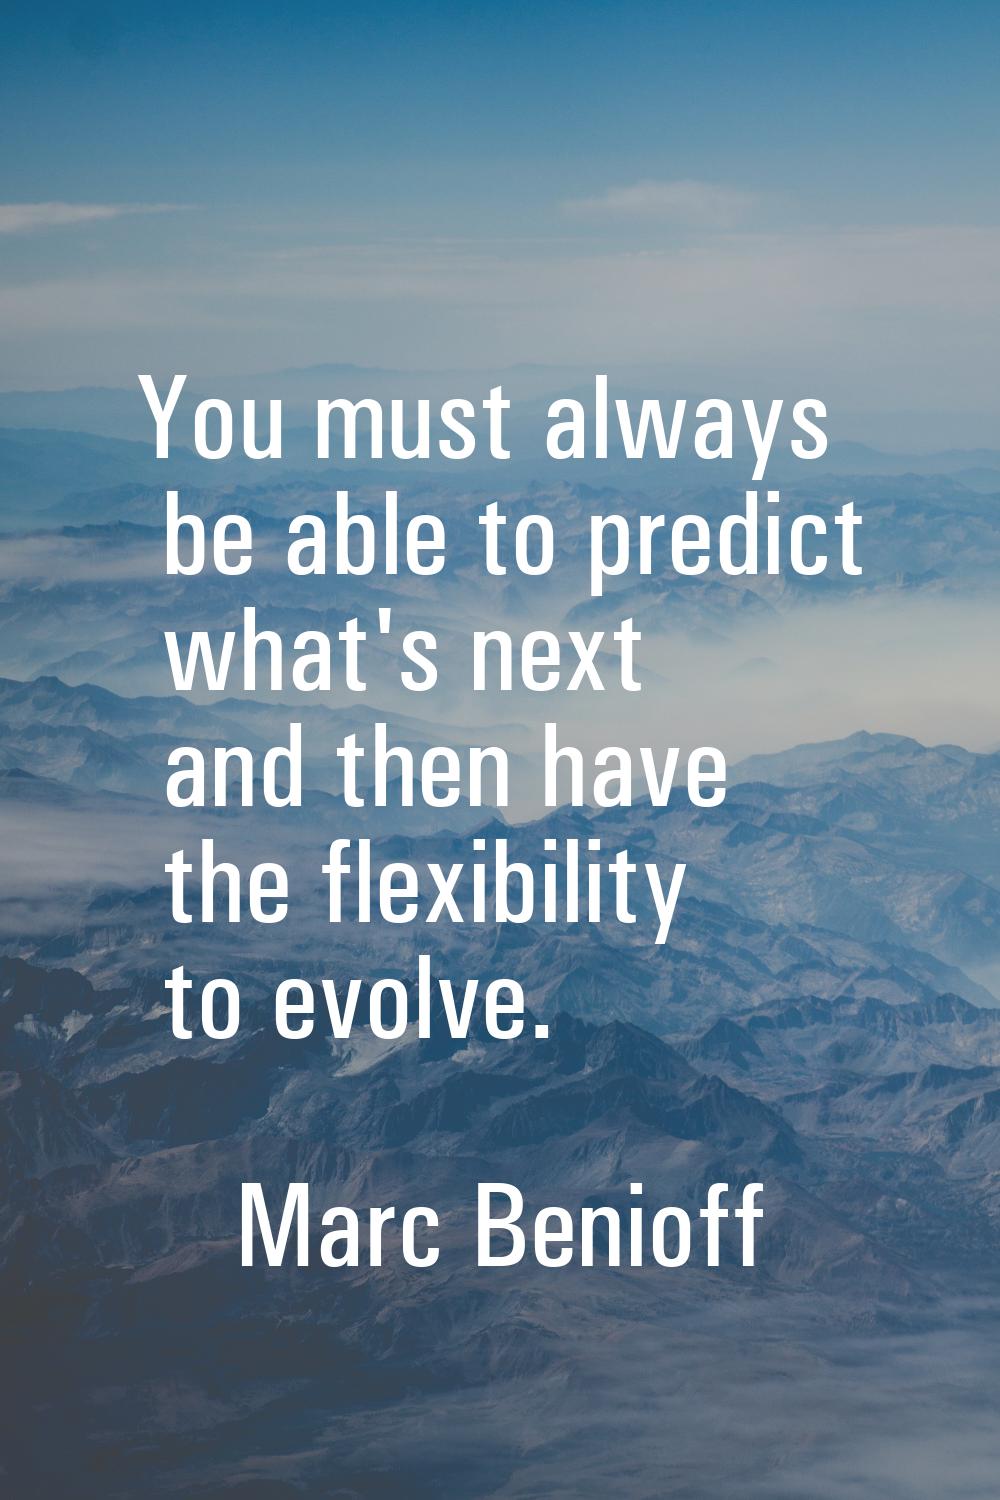 You must always be able to predict what's next and then have the flexibility to evolve.